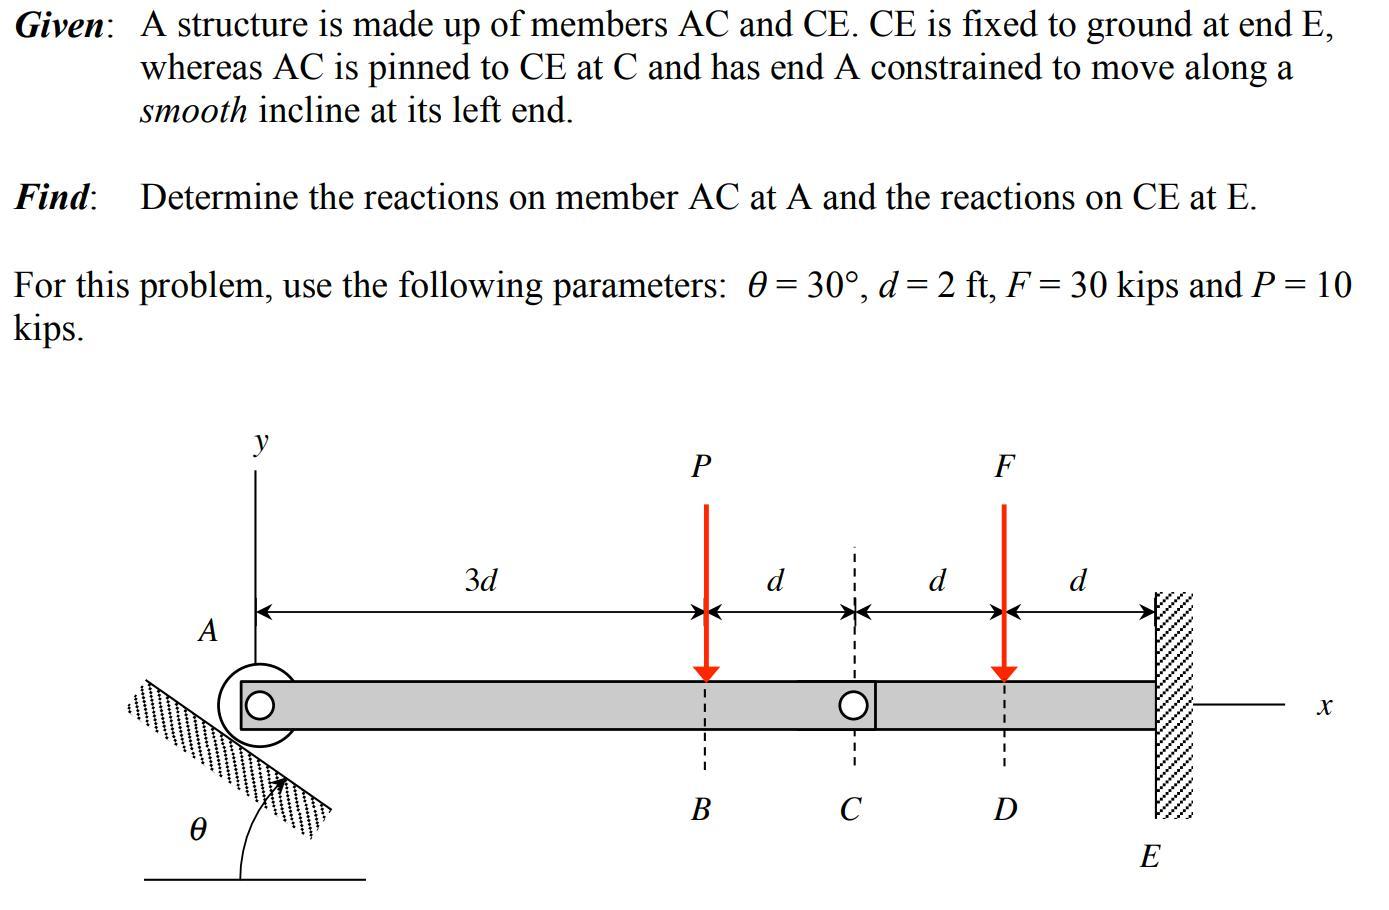 Given: A structure is made up of members ( mathrm{AC} ) and ( mathrm{CE} ). ( mathrm{CE} ) is fixed to ground at end